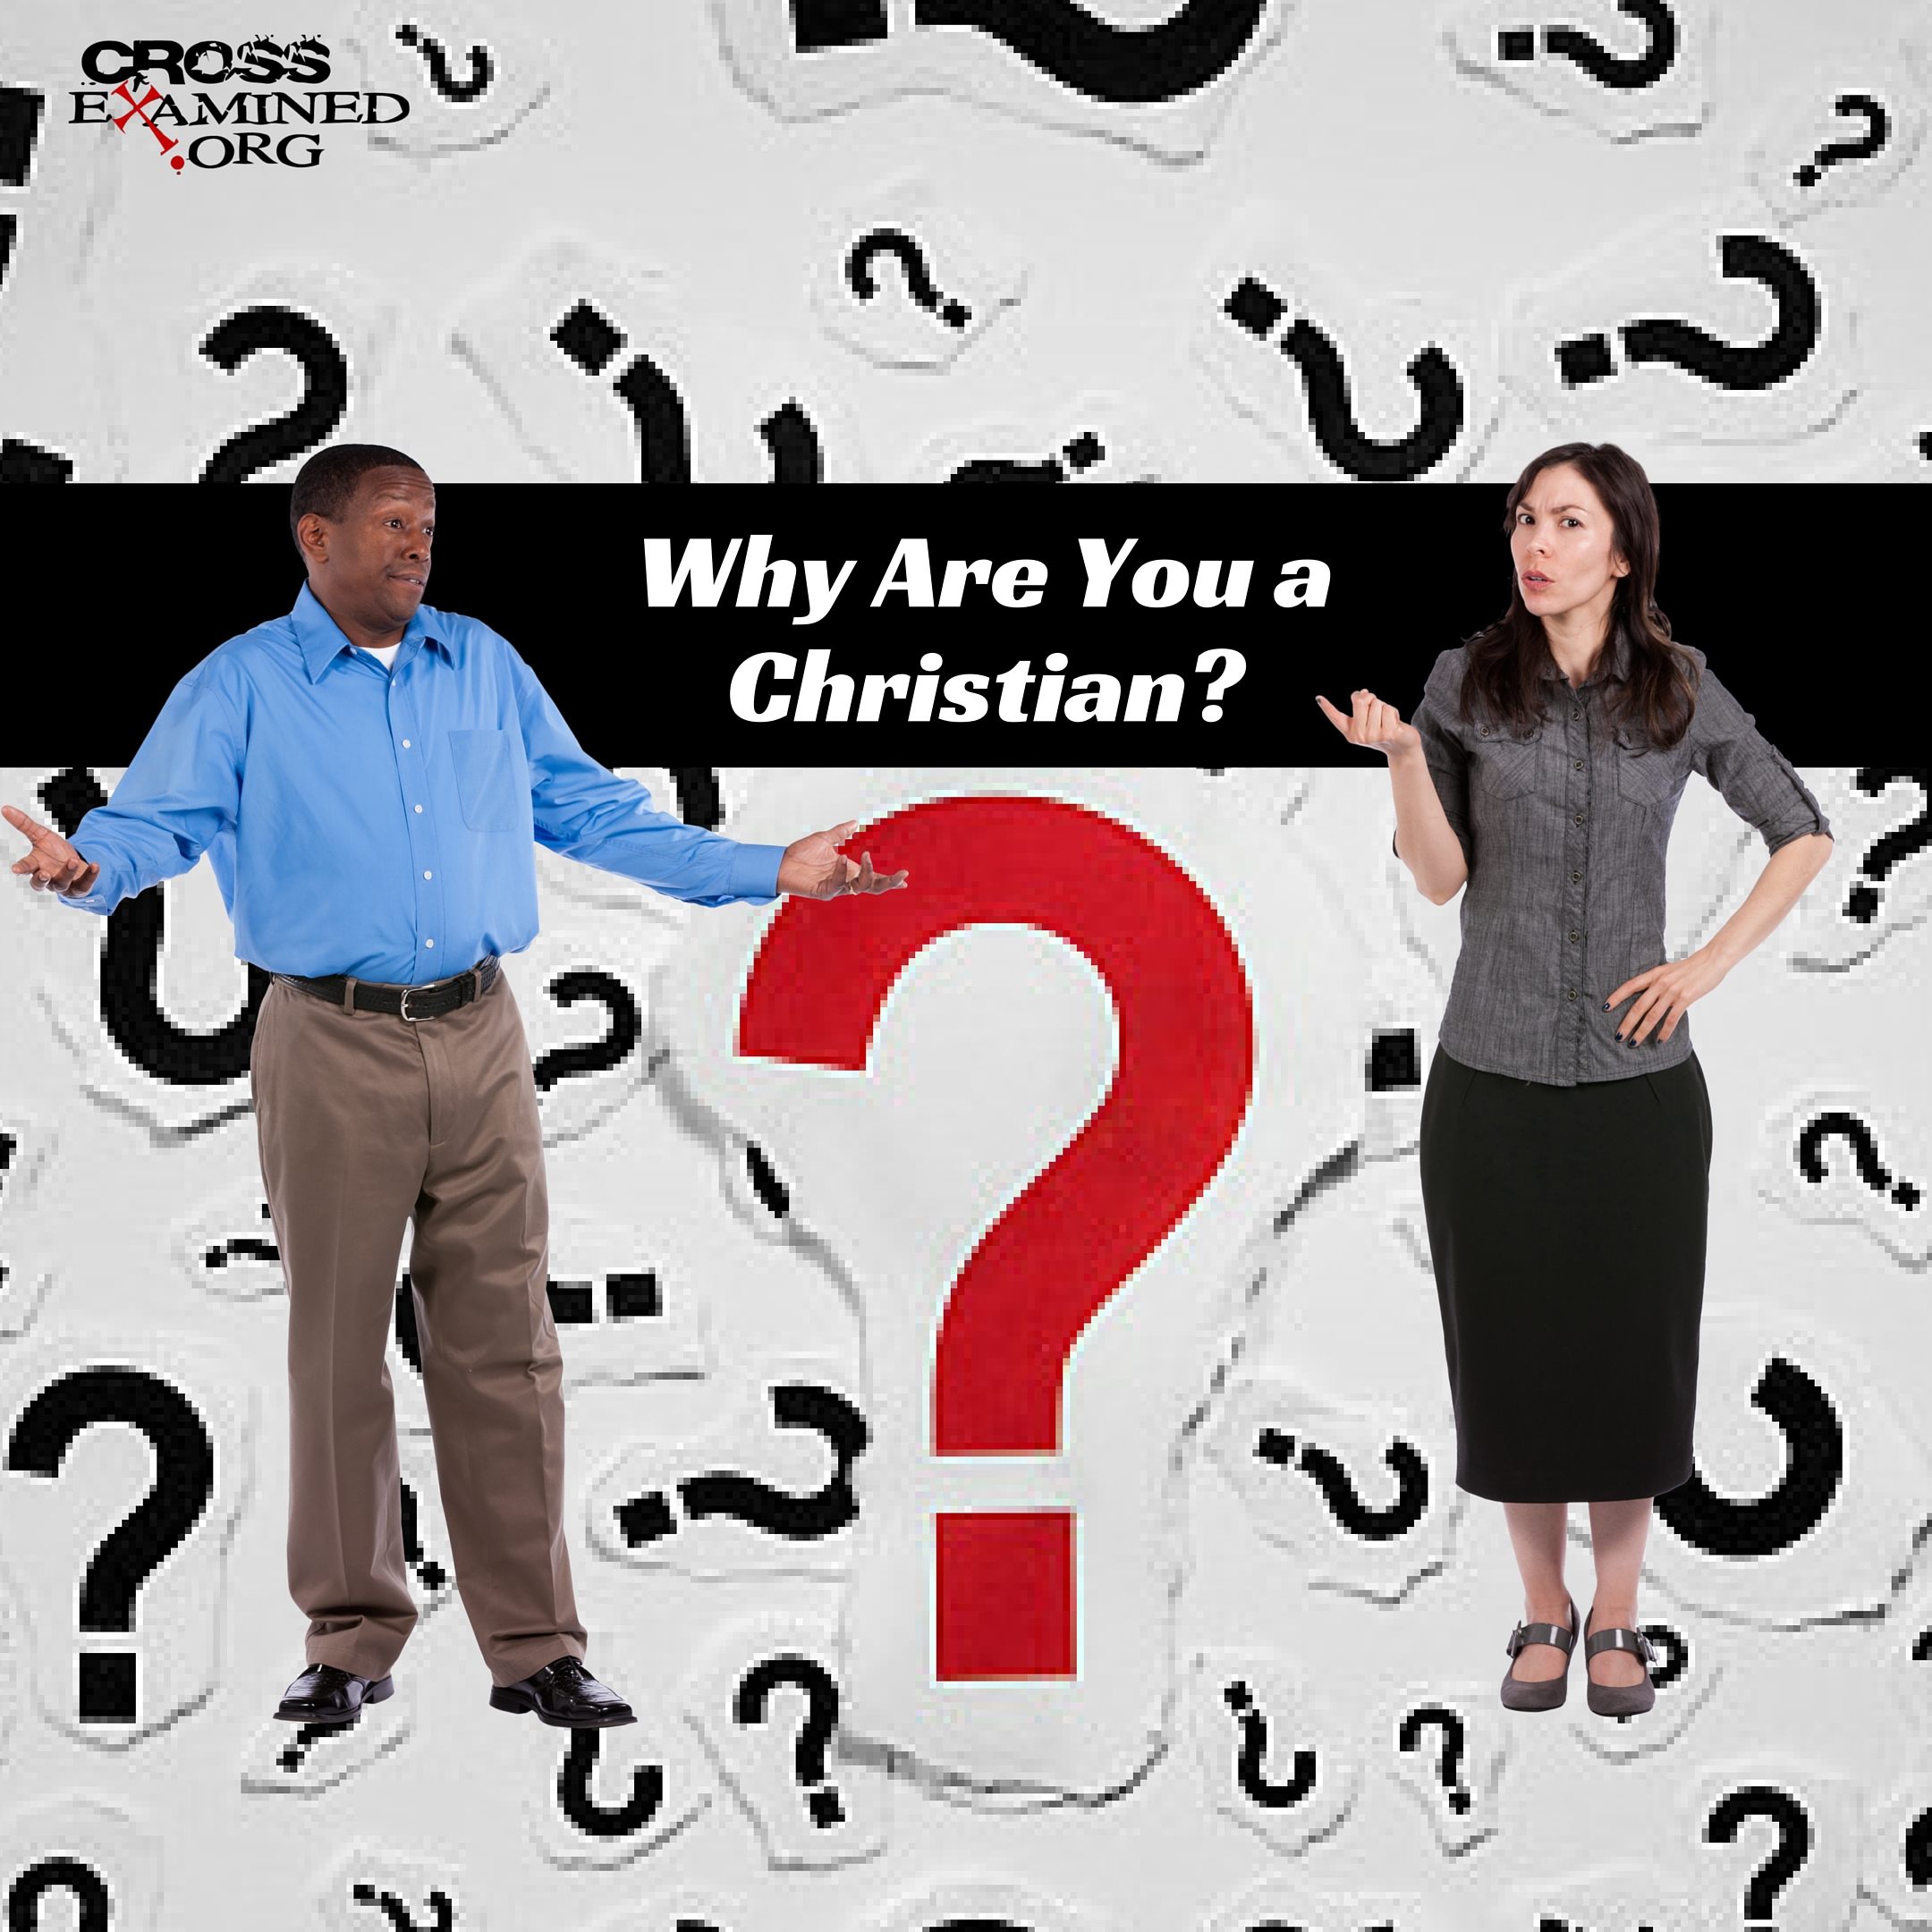 Why Are You a Christian?